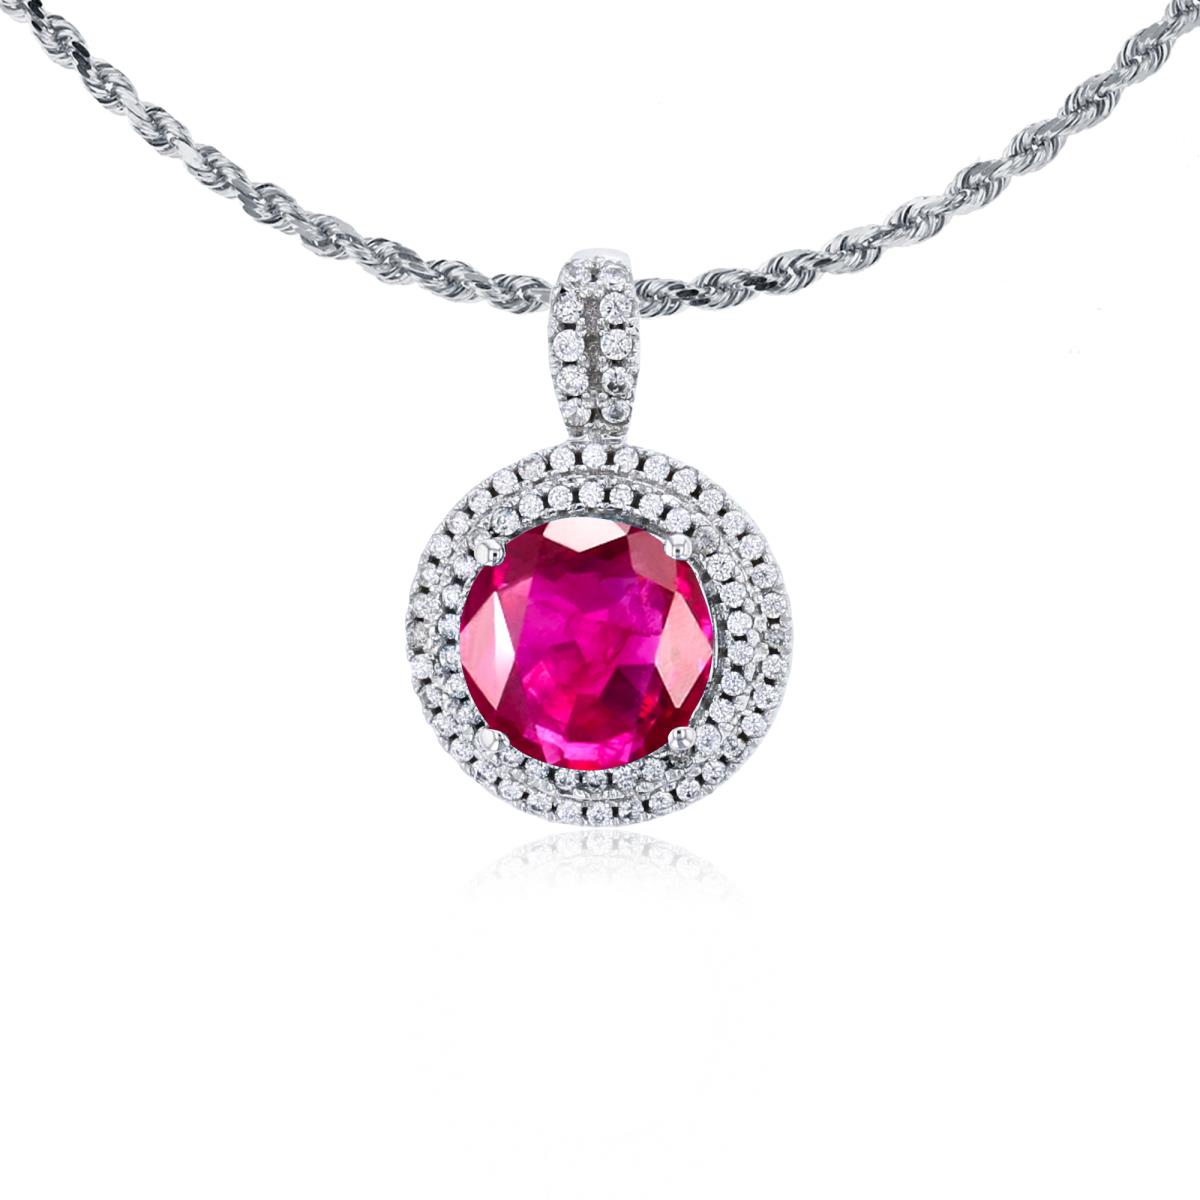 10K White Gold 7mm Round Glass Filled Ruby & 0.25 CTTW Diamonds Double Halo 18" Rope Chain Necklace